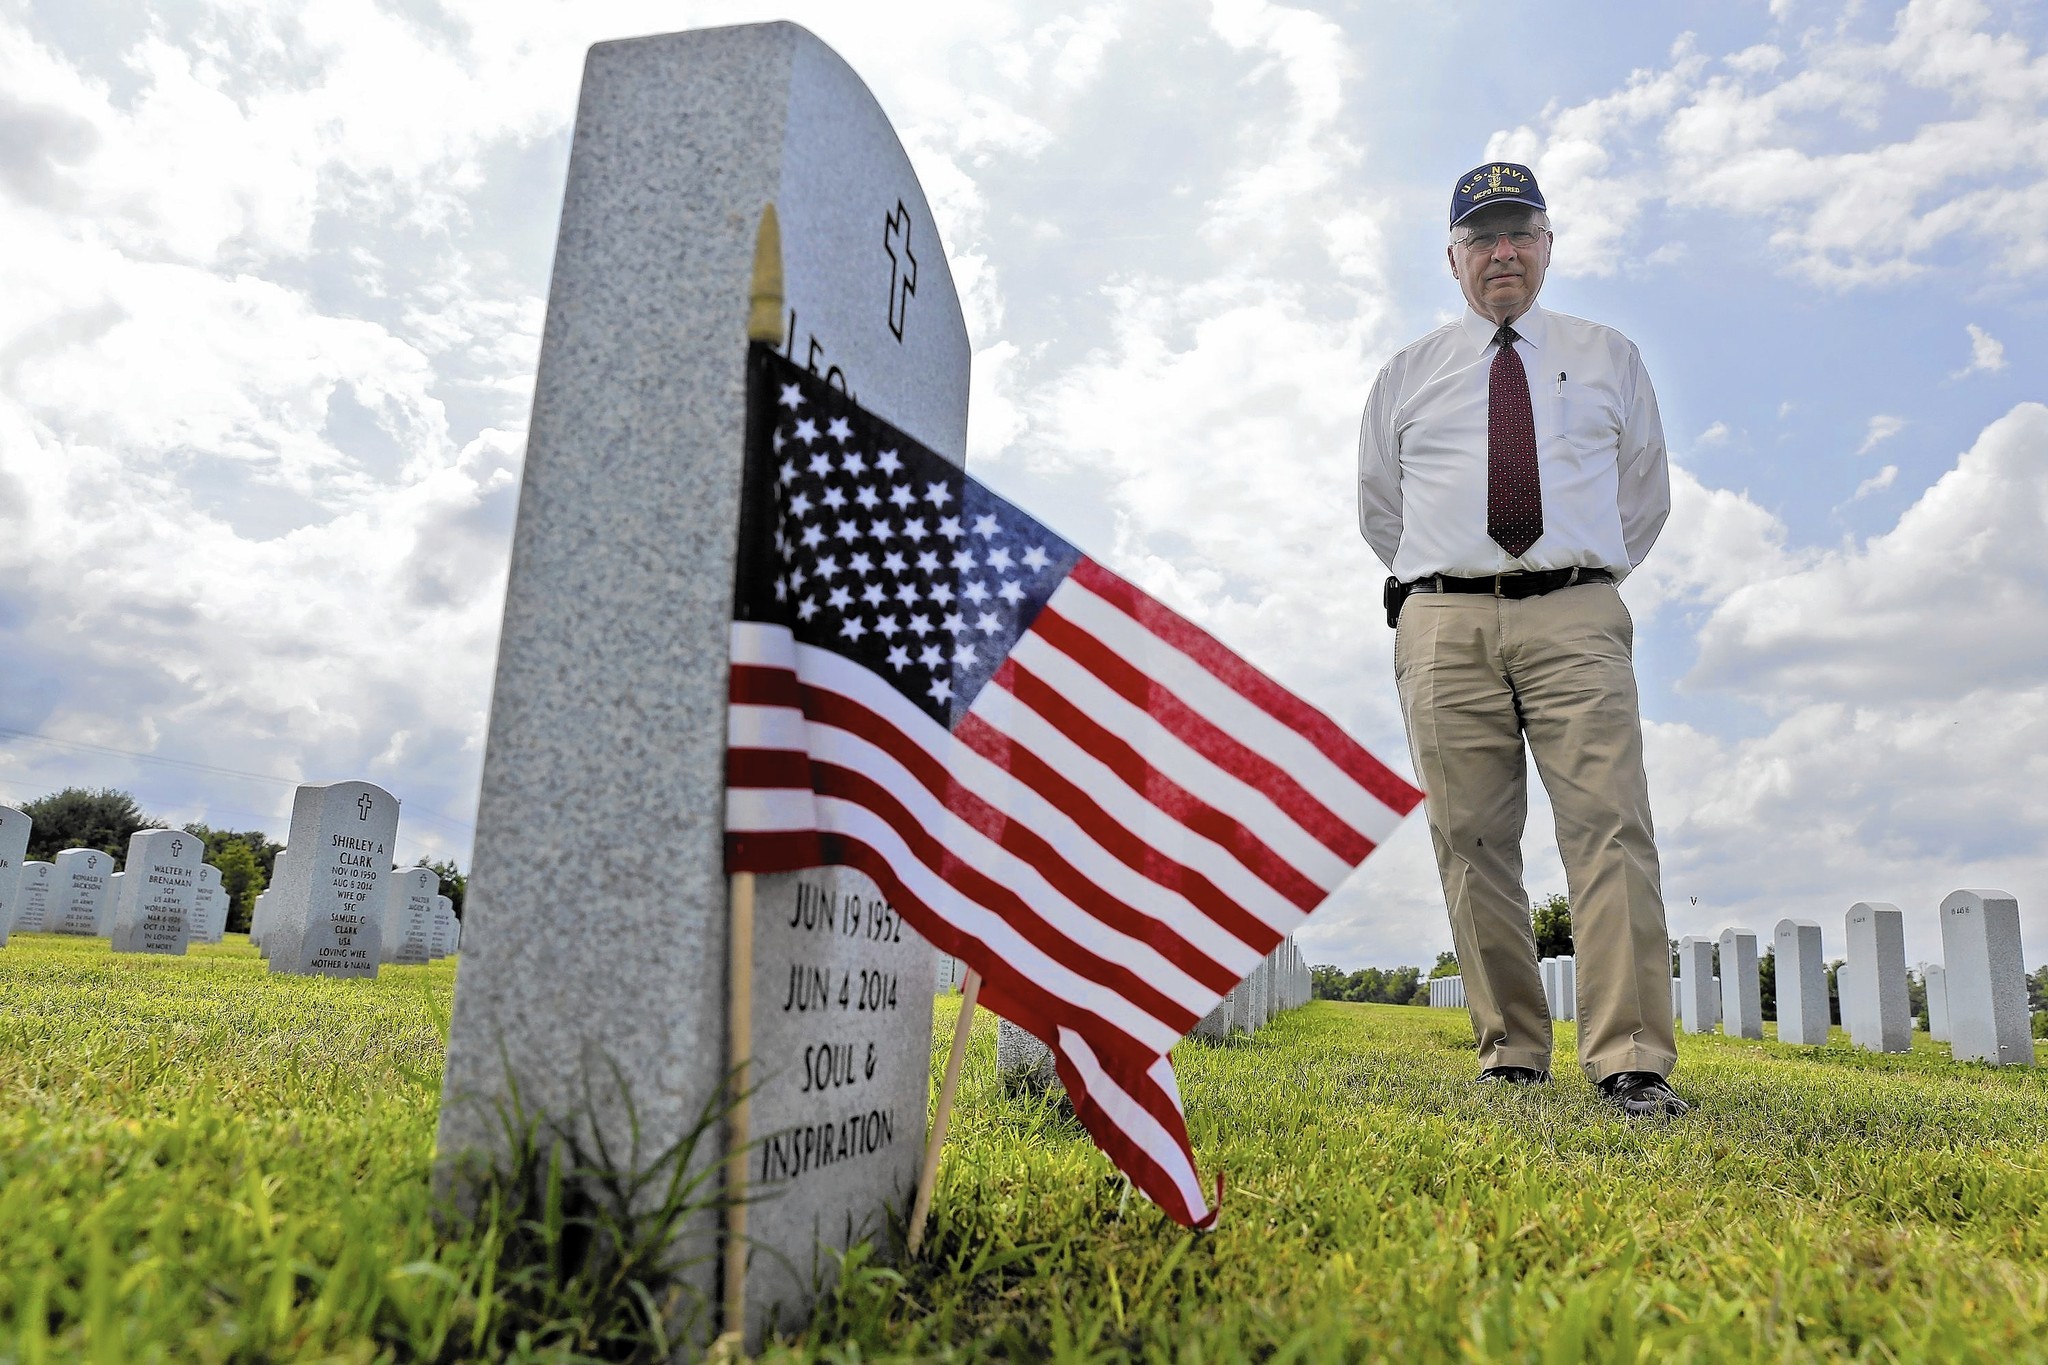 Suffolk veterans cemetery to expand - Daily Press